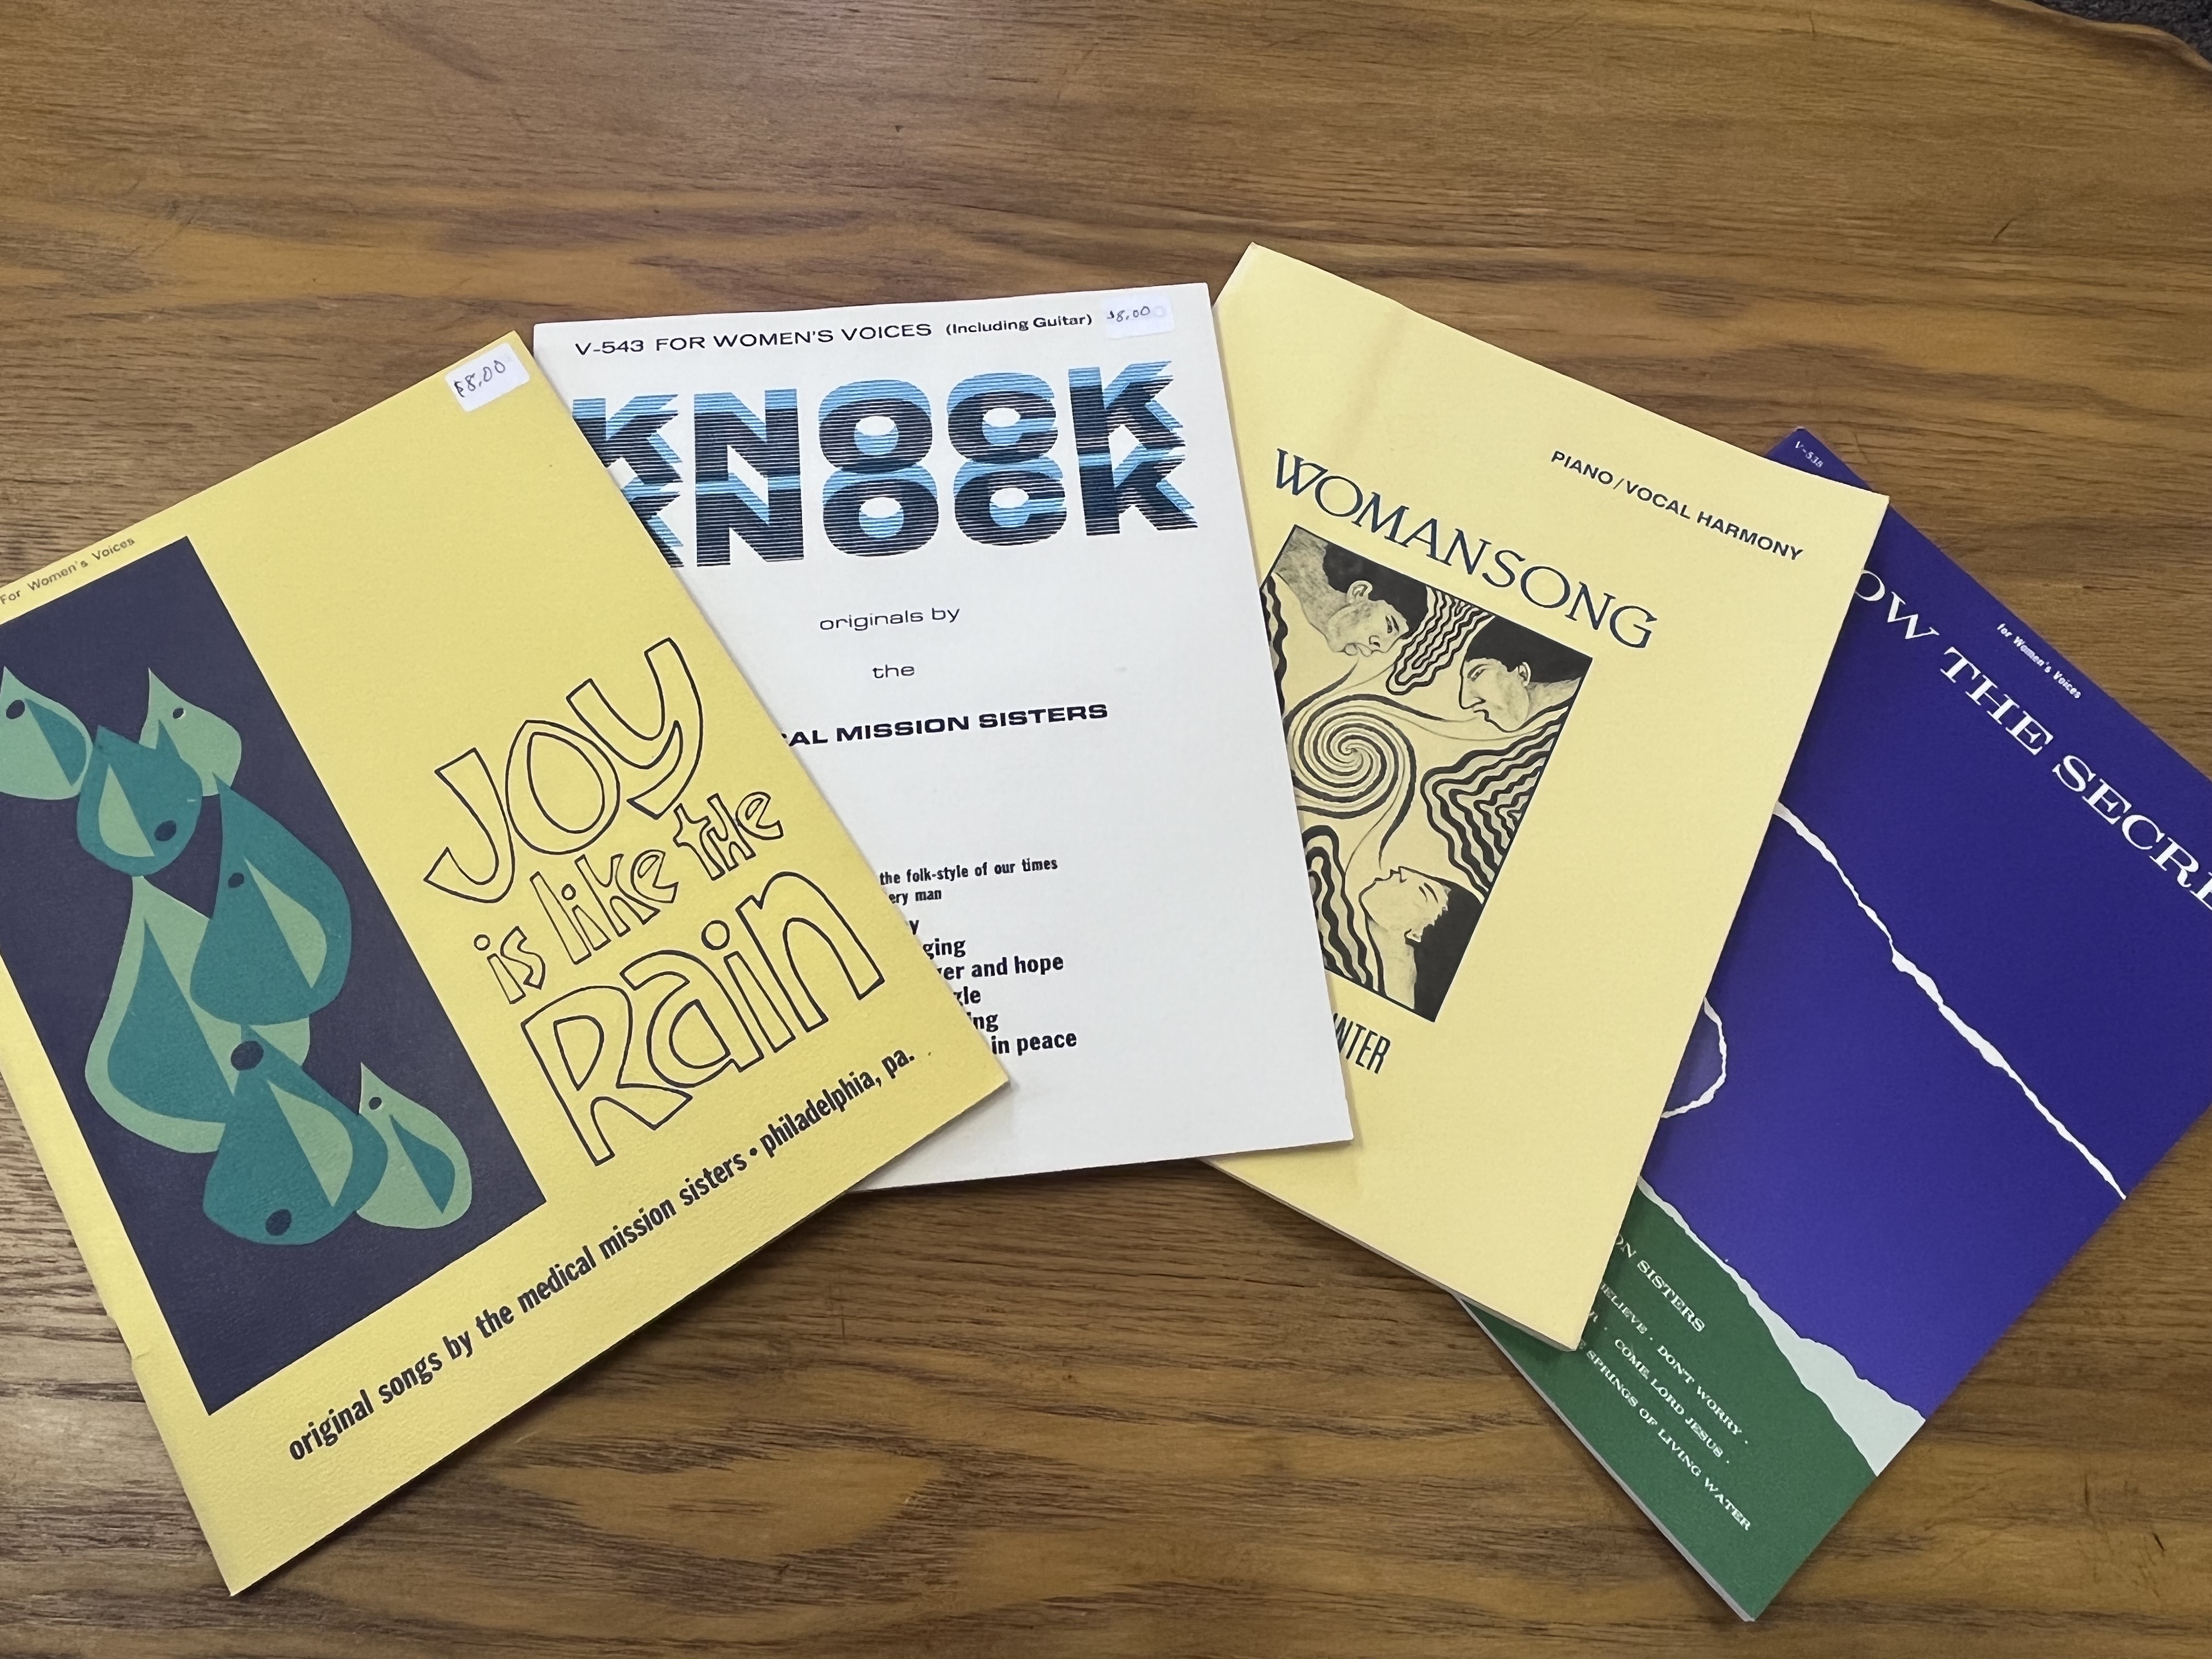 Four Songbooks (Joy is like the Rain, I Know the Secret, Knock Knock, and Womansong